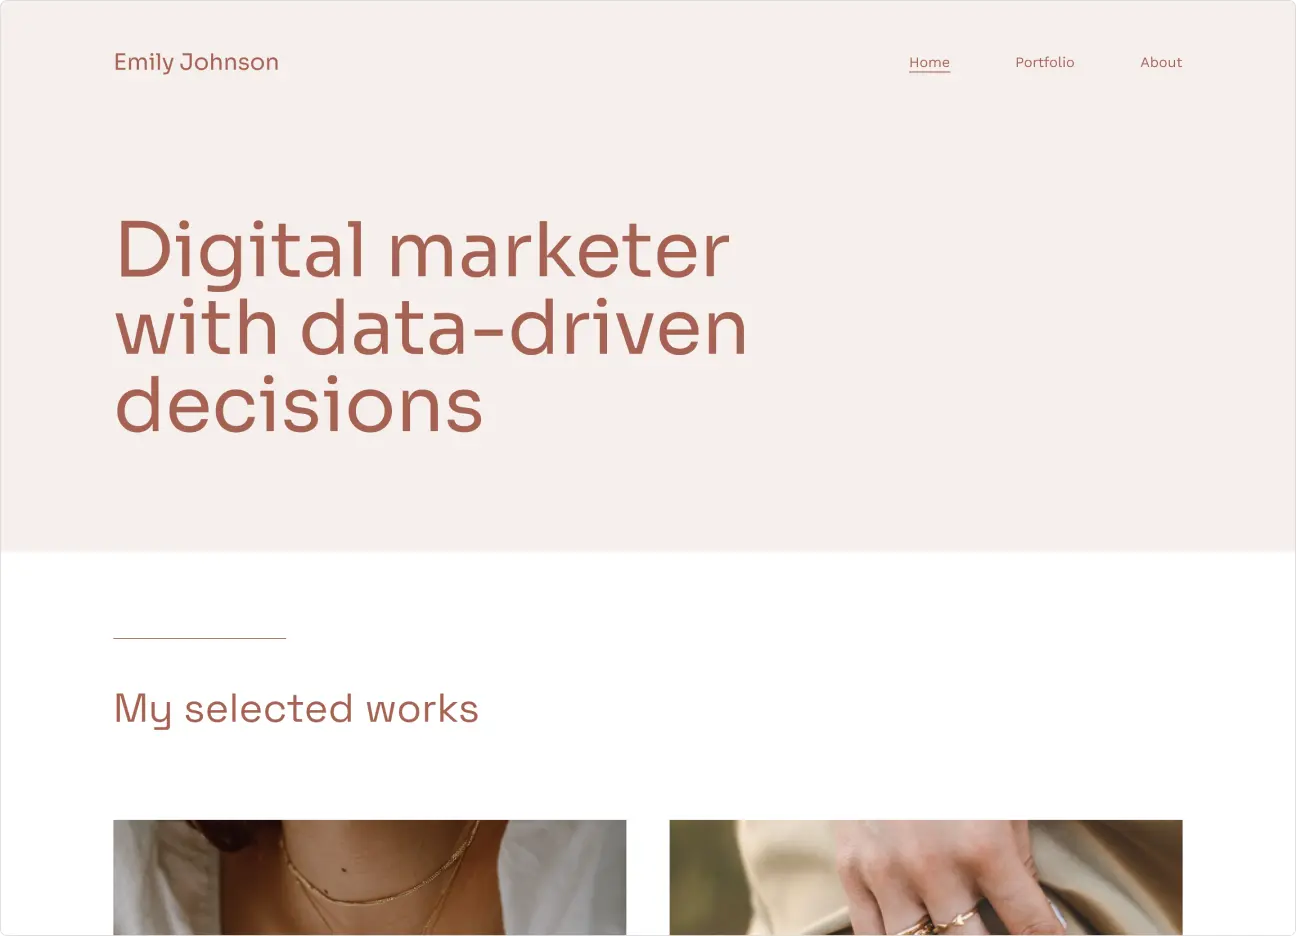 A freelance marketing portfolio website made with Copyfolio, for Emily Johnson, who is a digital marketer with data-driven decisions.